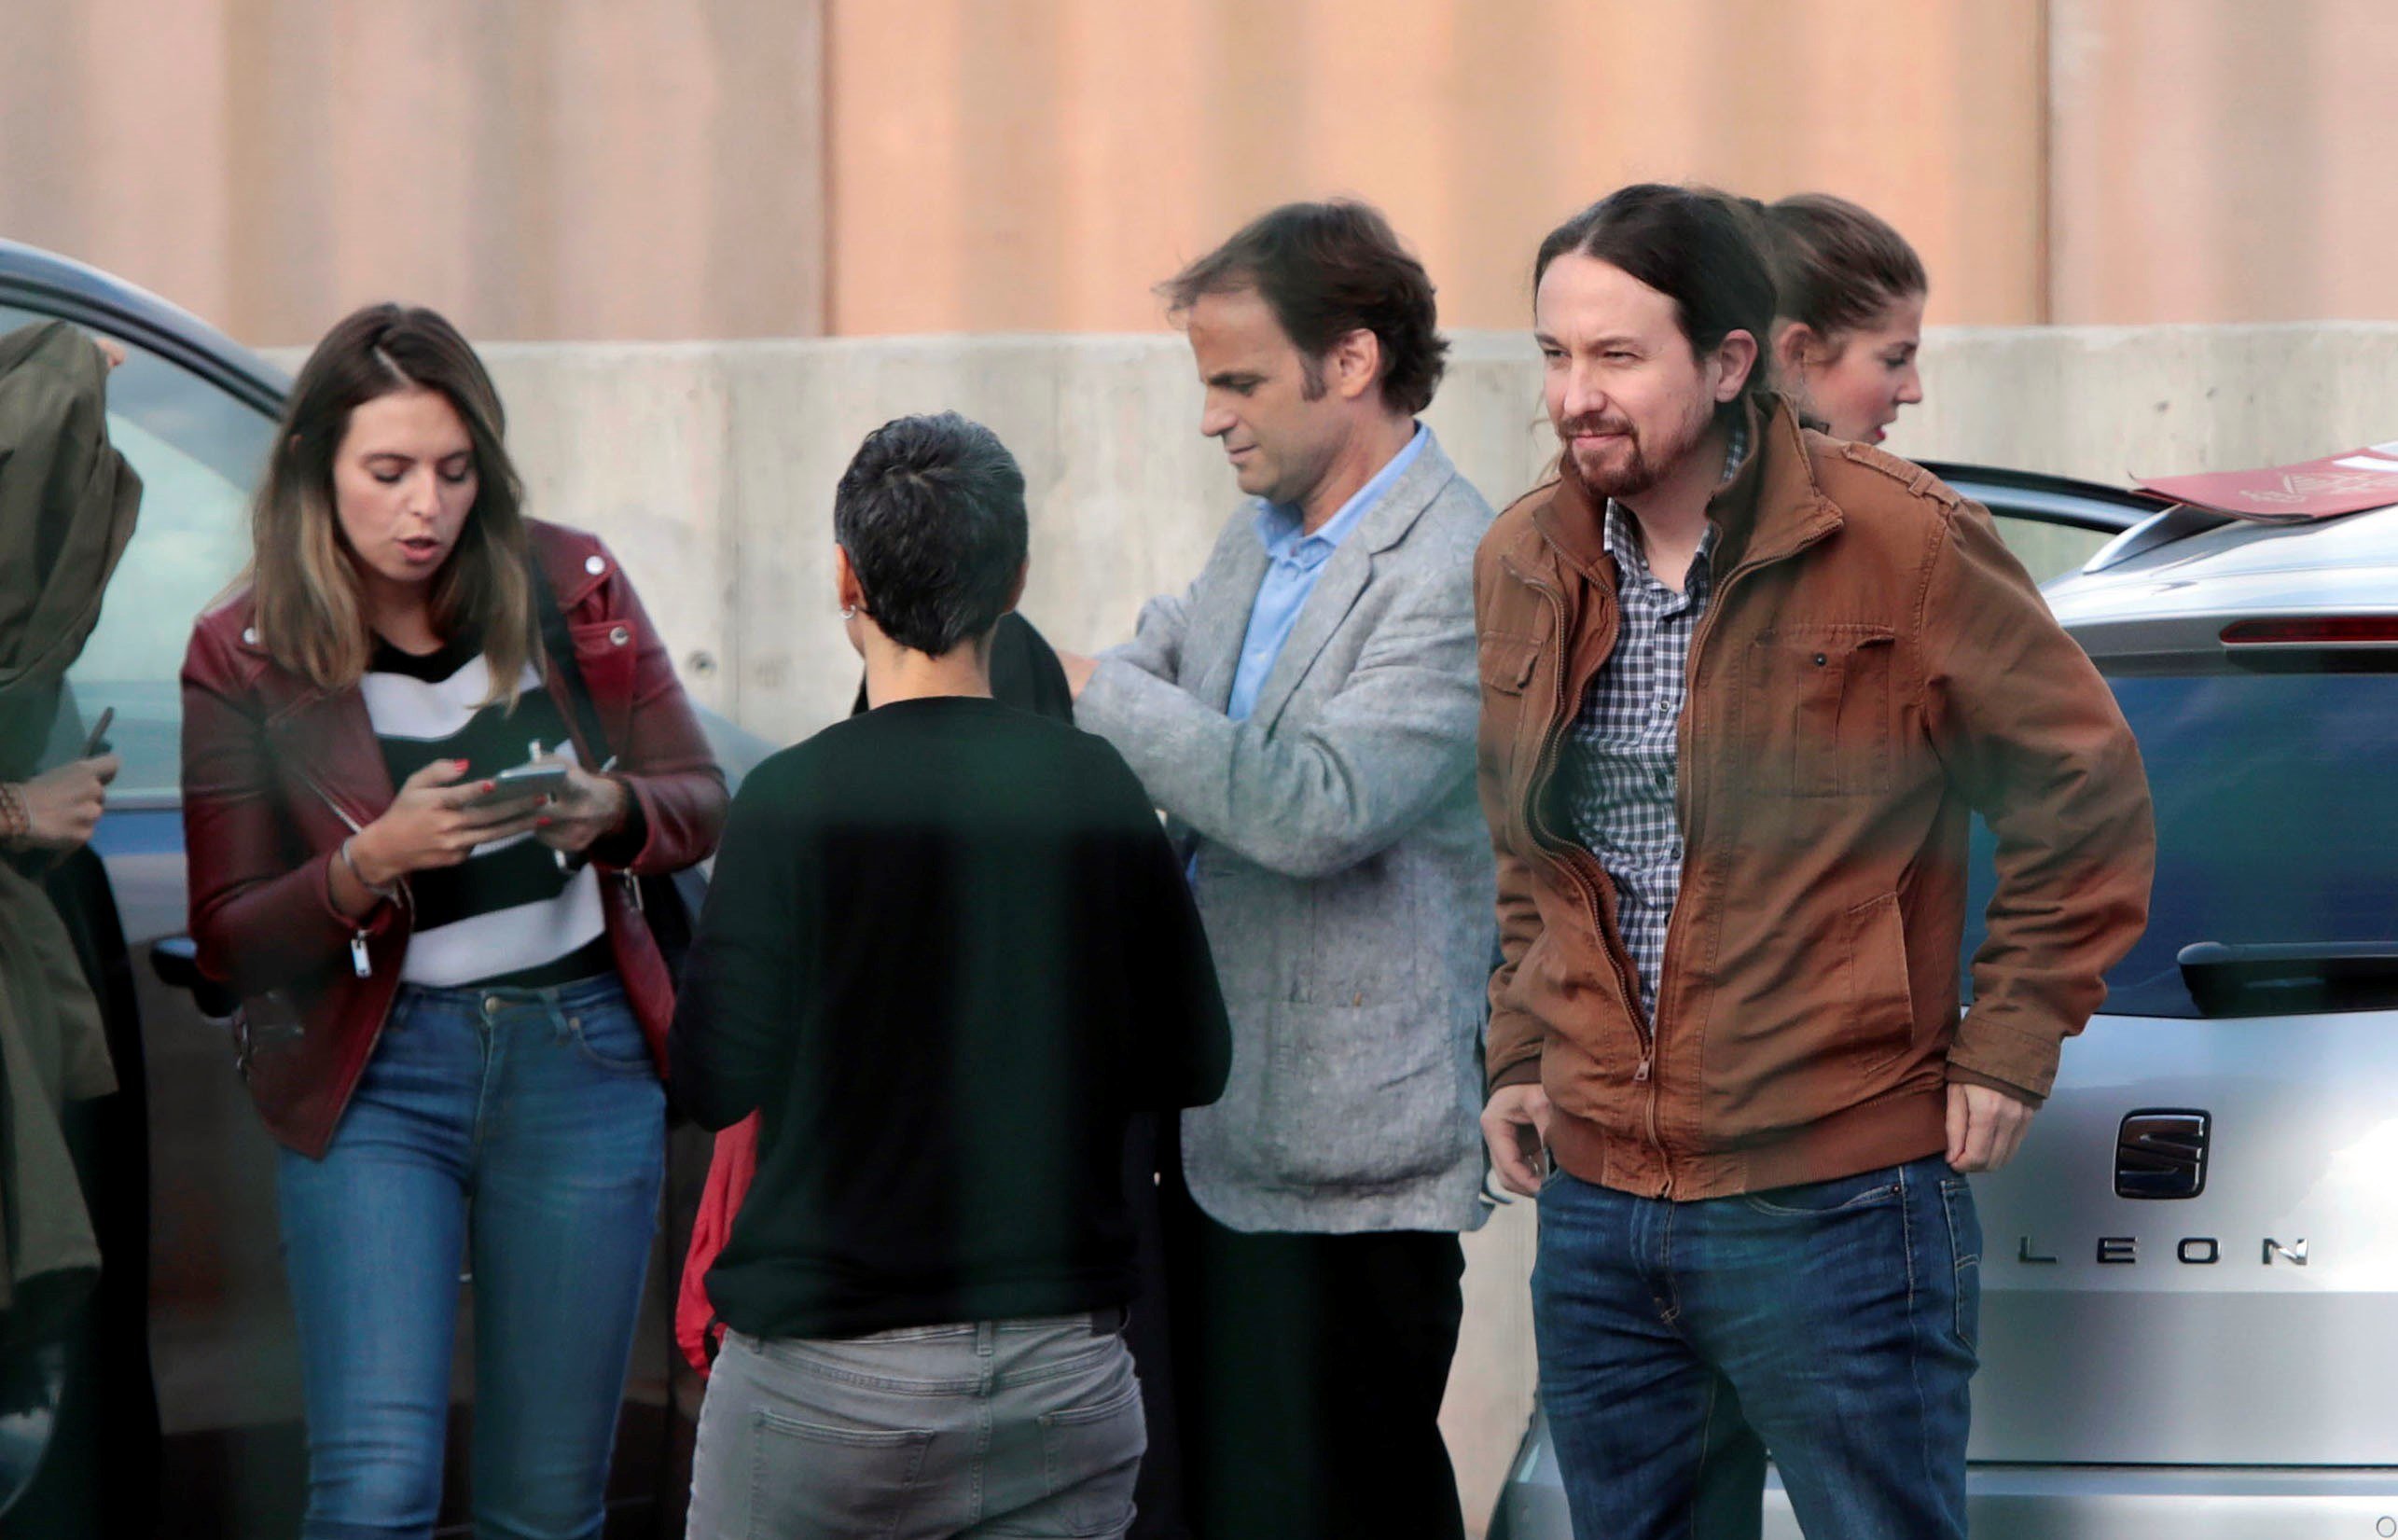 Iglesias after meeting Junqueras: "Now it's the government's turn to do something"